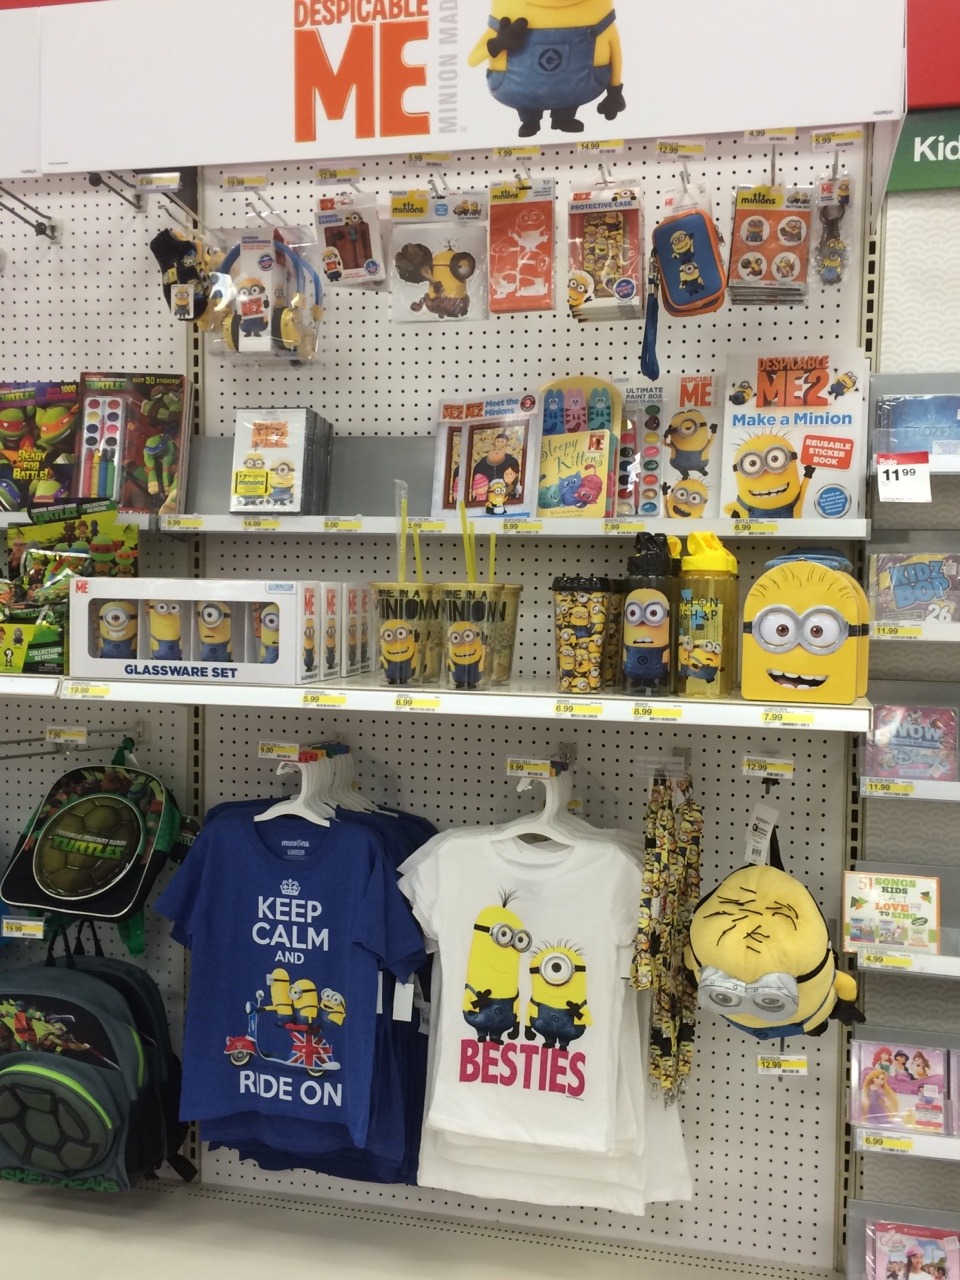 Minions are Terrible - Here's Why 15